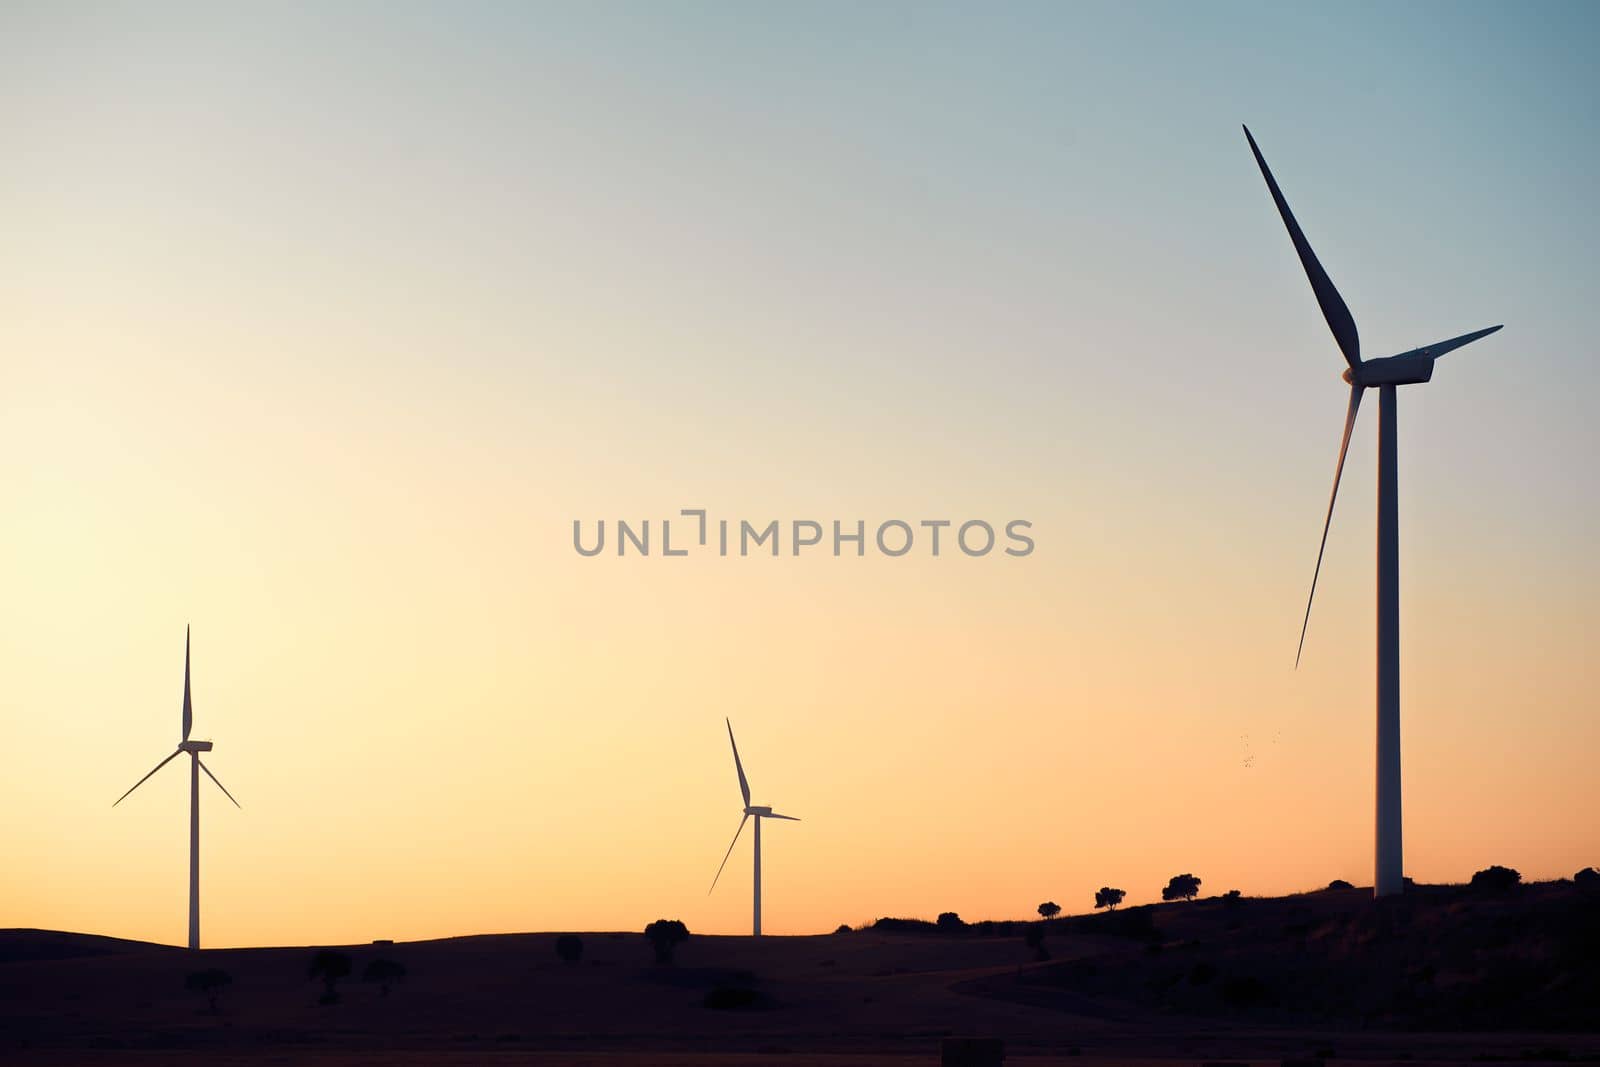 Silhouette of three windmills producing green energy in a wind farm at sunset. They are in a rural environment surrounded by crops and trees, the sky is clean and clear. Copy space